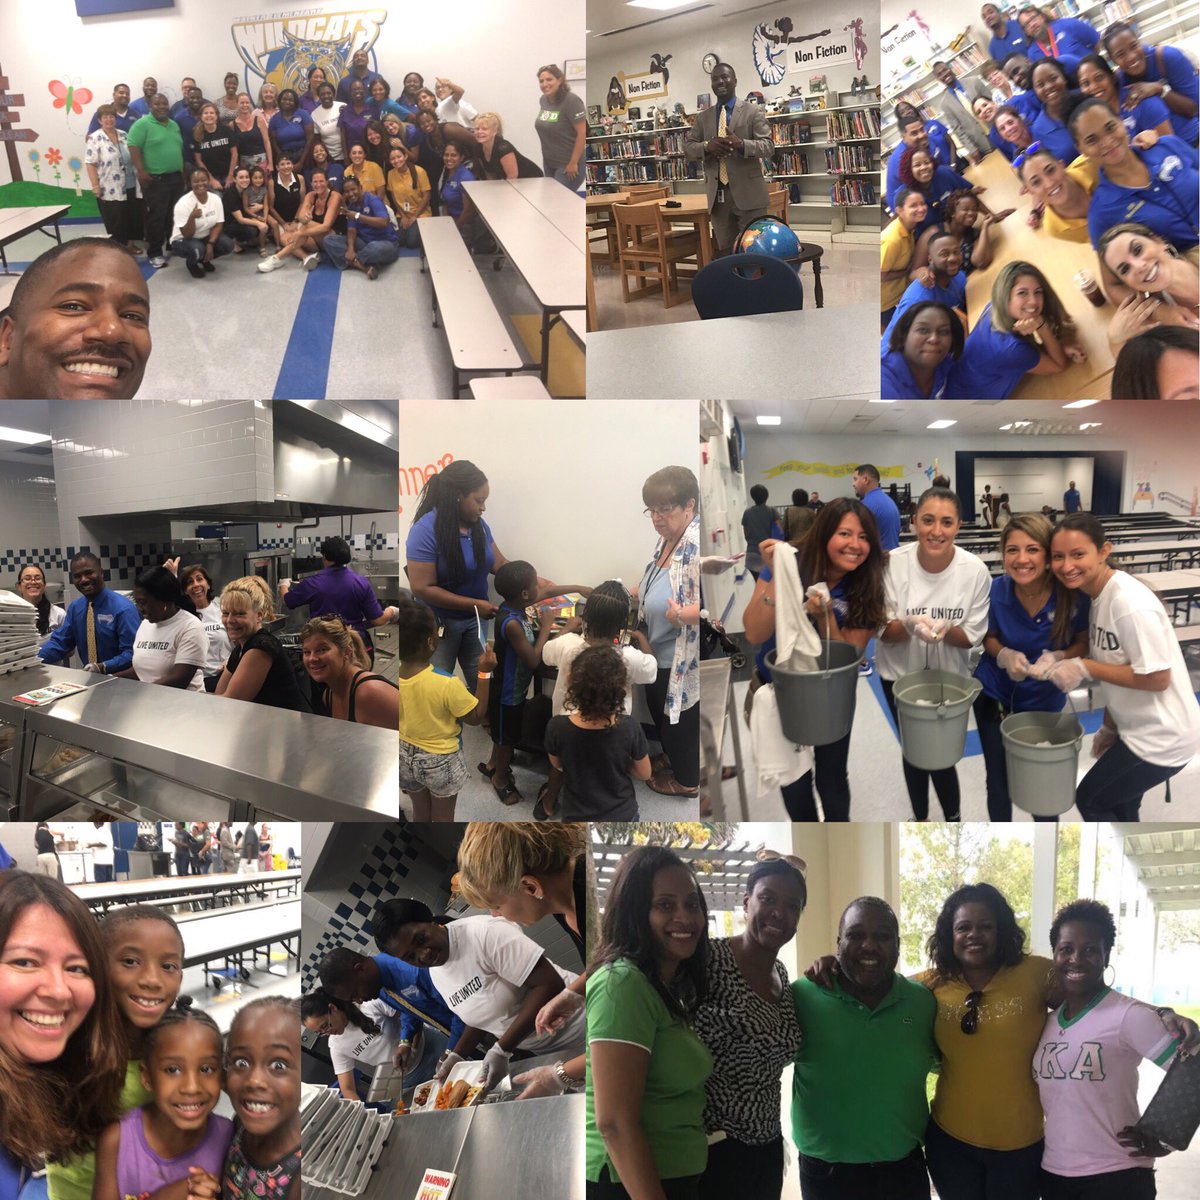 Today the @browardschools & @UnitedWayBC were able to serve hot meals to over 500 people. Thank you to all of our Wildcat volunteers